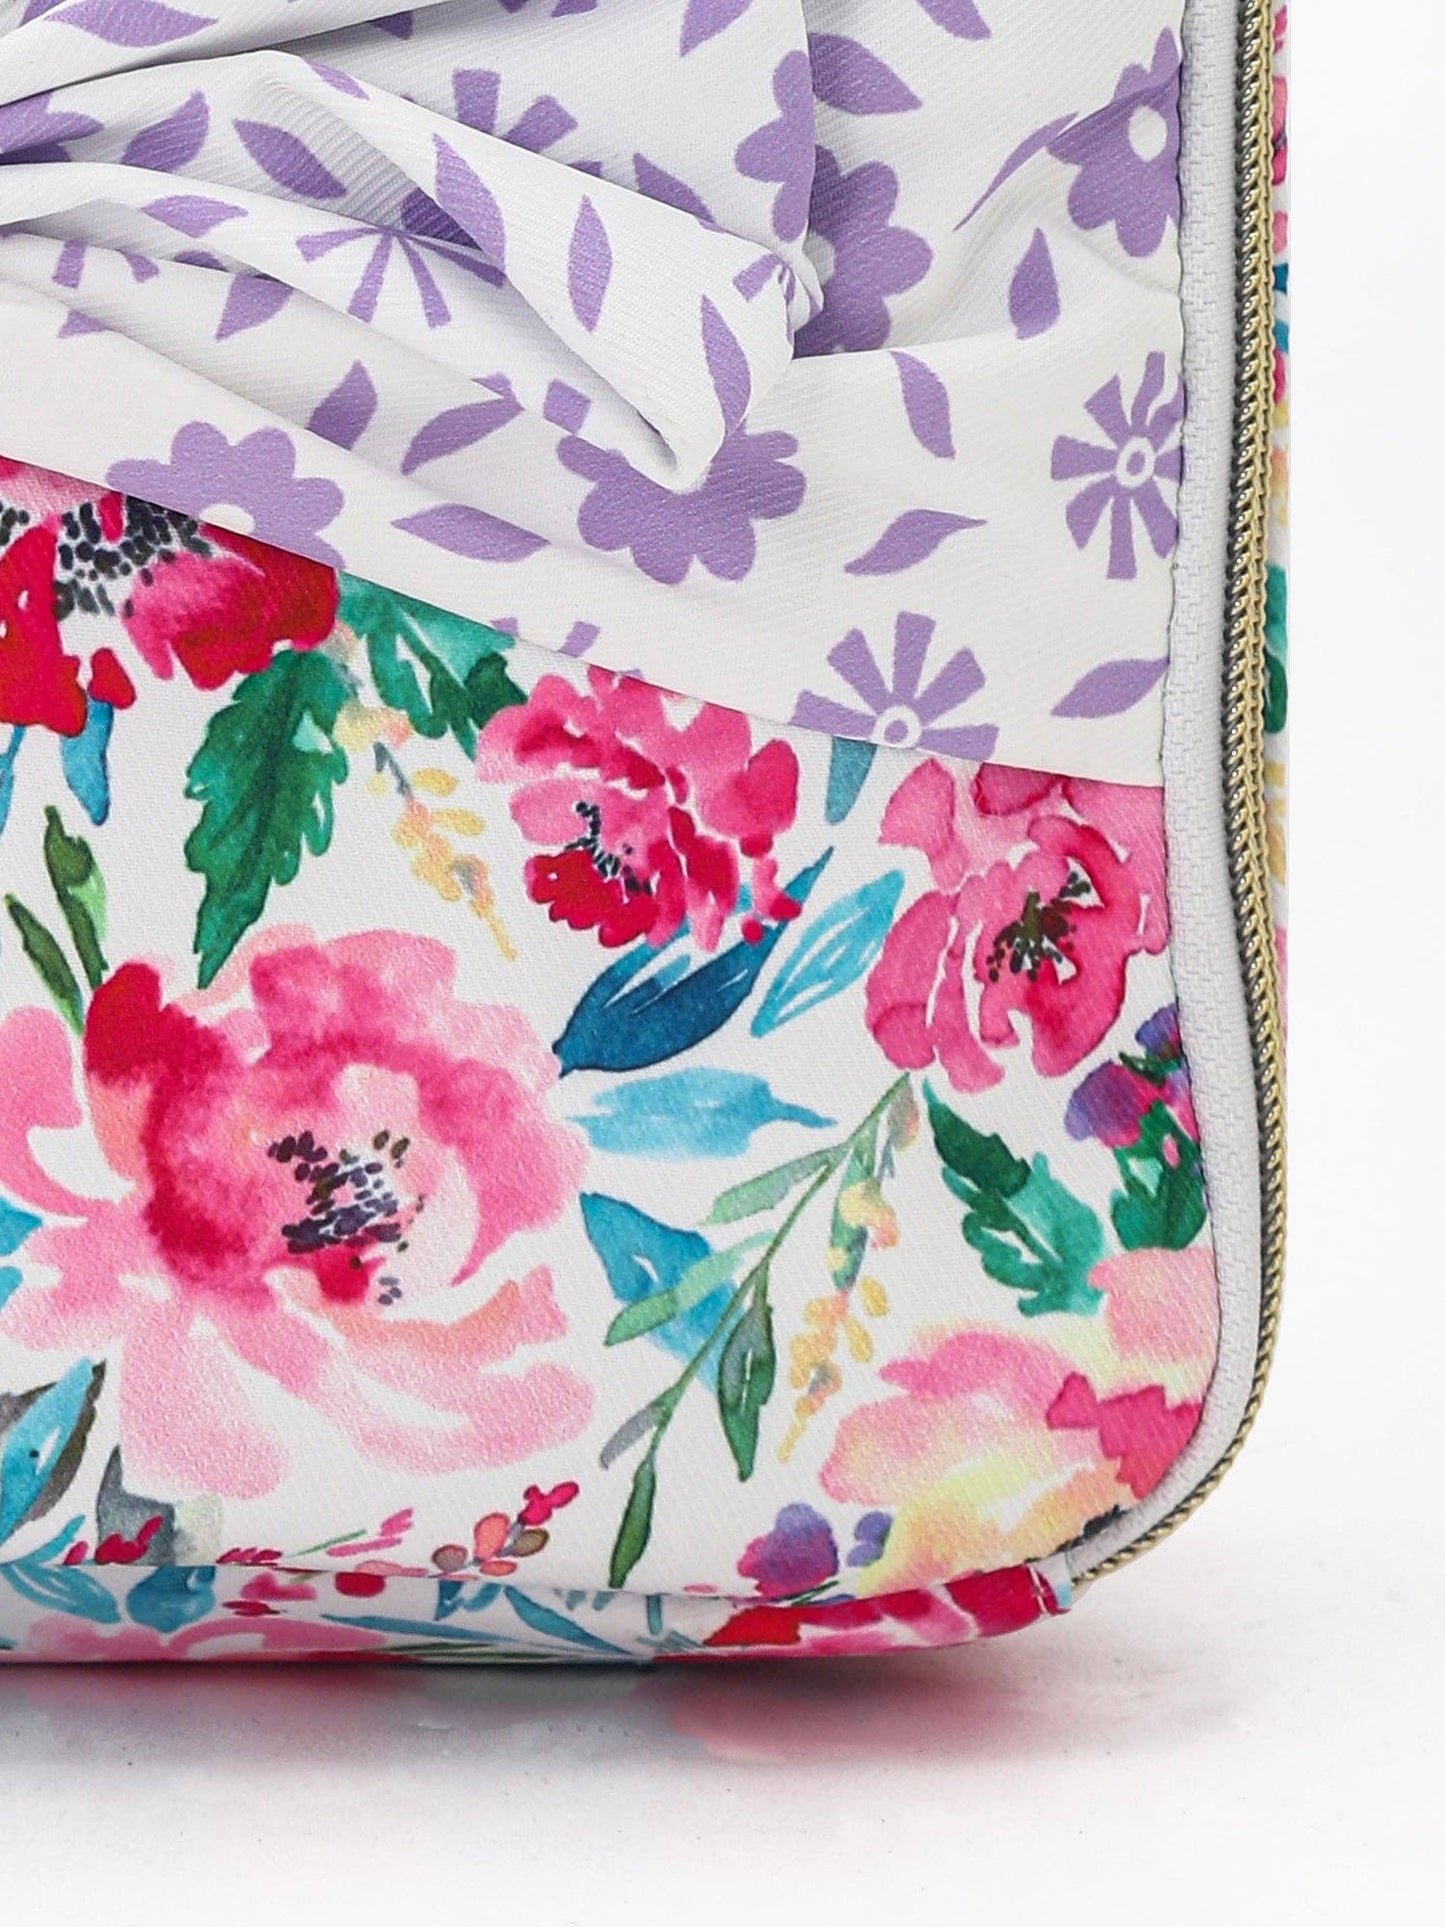 Flower Bow Lunch Box